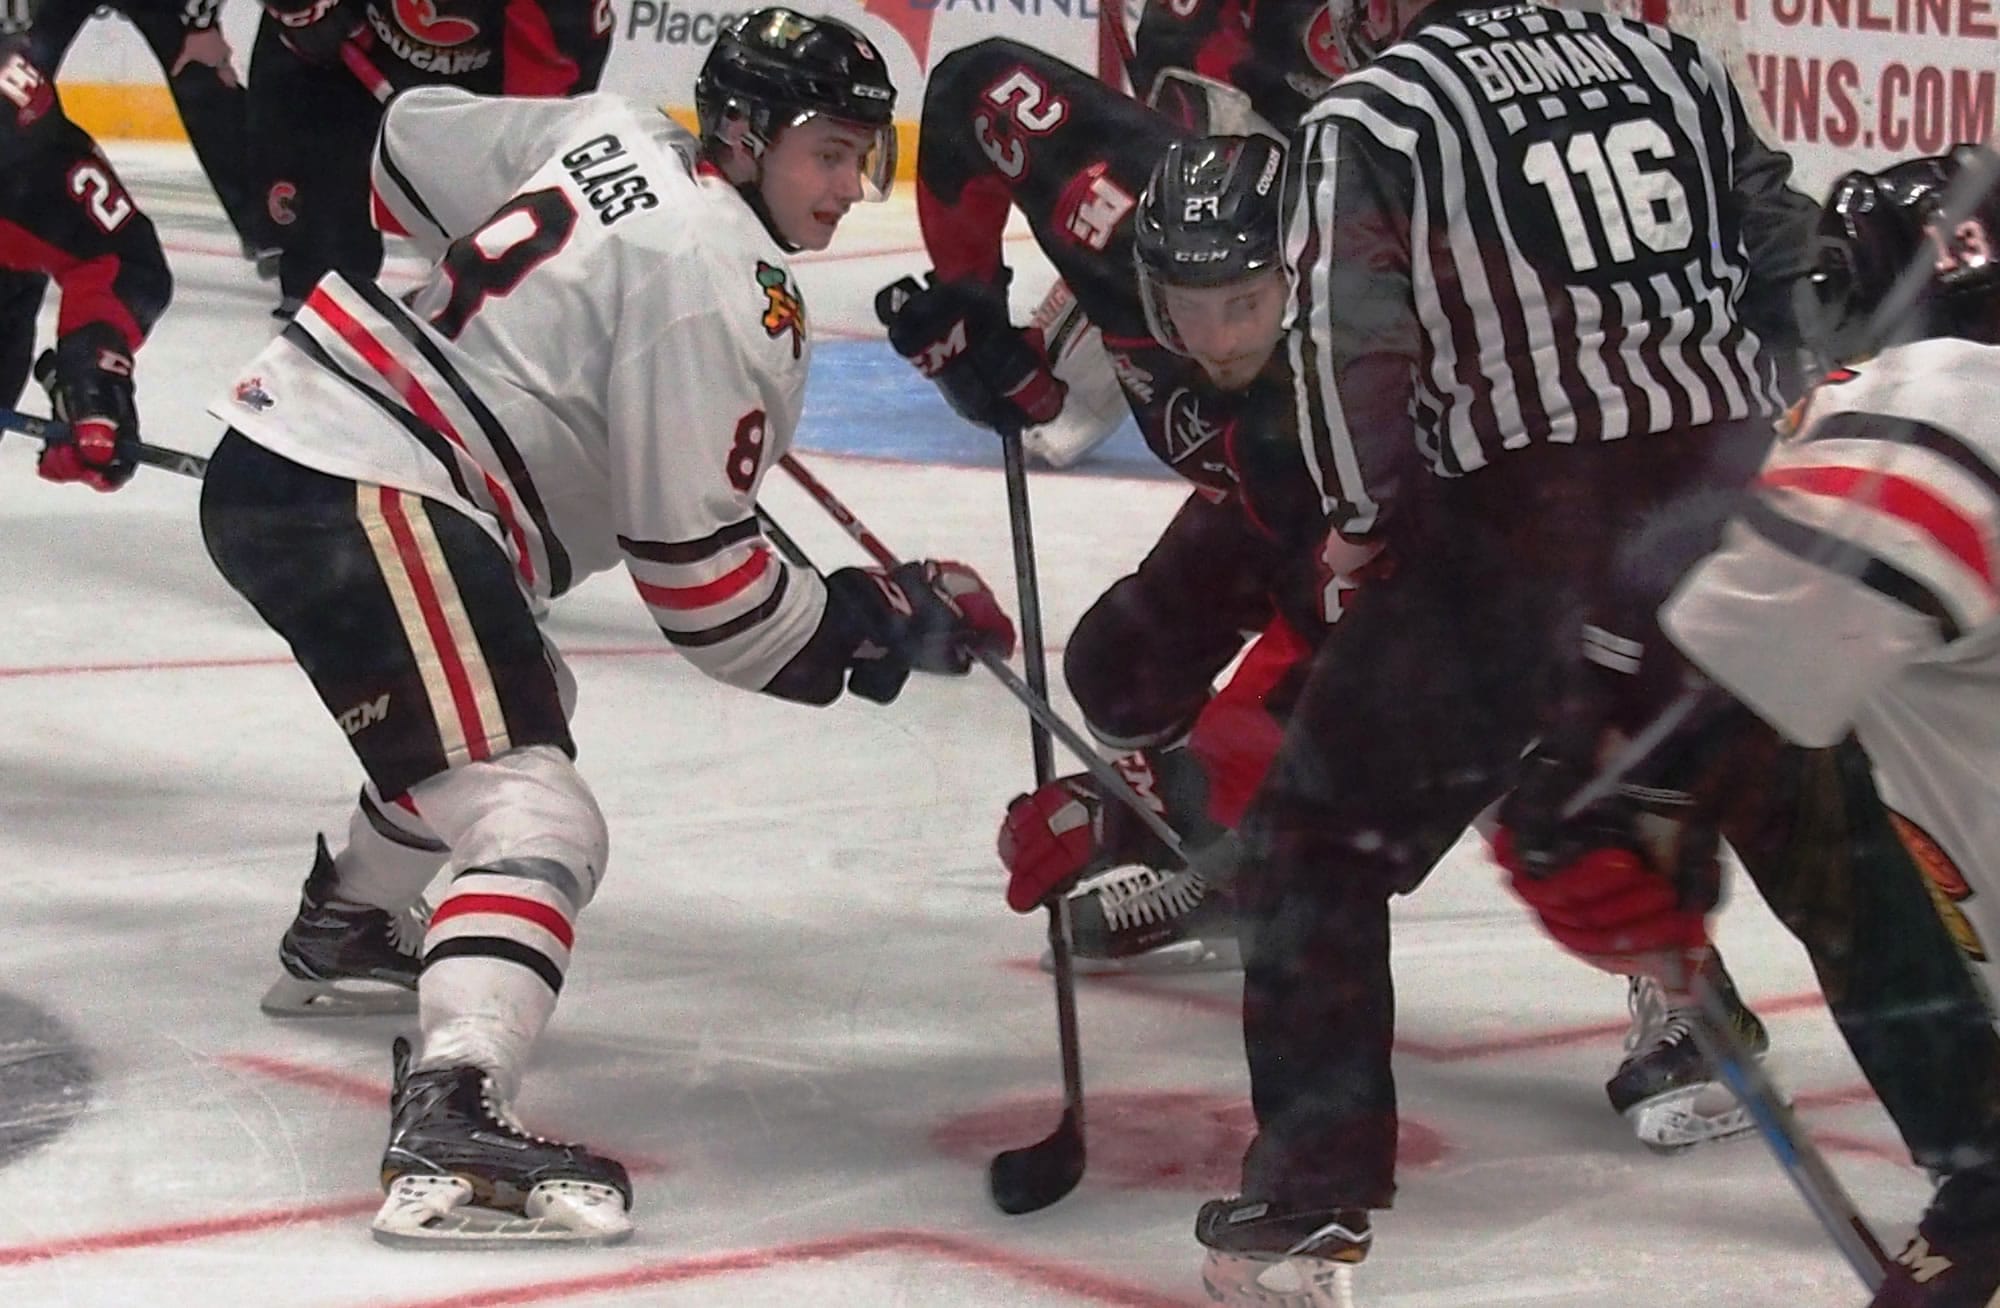 Cody Glass (8) and the Portland Winterhawks will faceoff against the Prince George Cougars in the first round of the 2017 Western Hockey League playoffs.